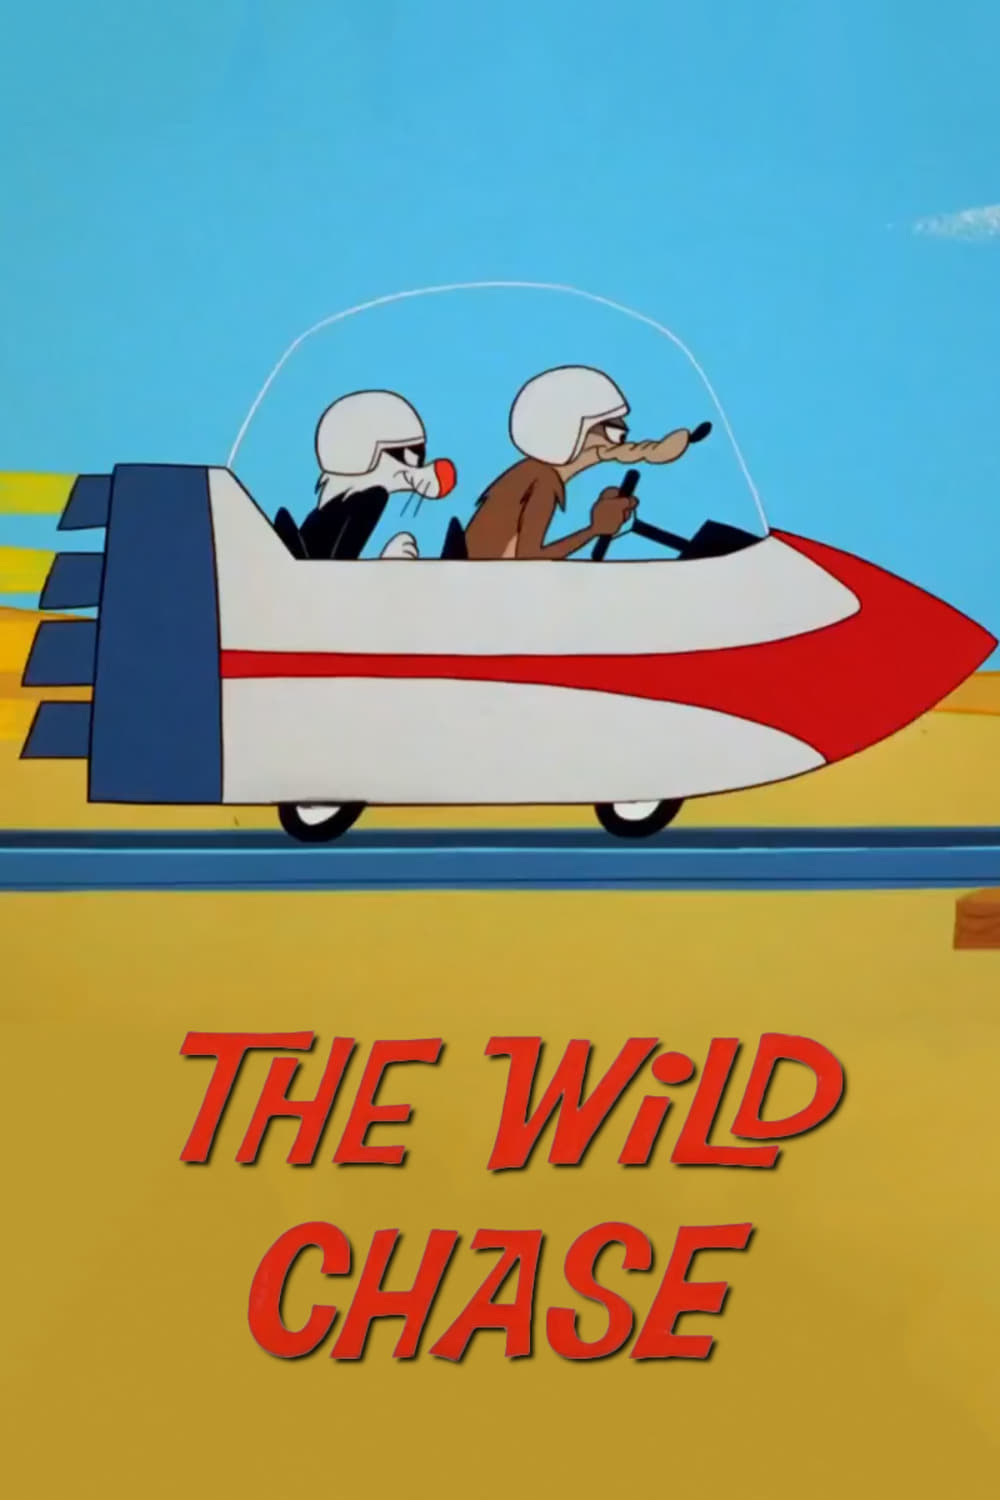 The Wild Chase (1965)